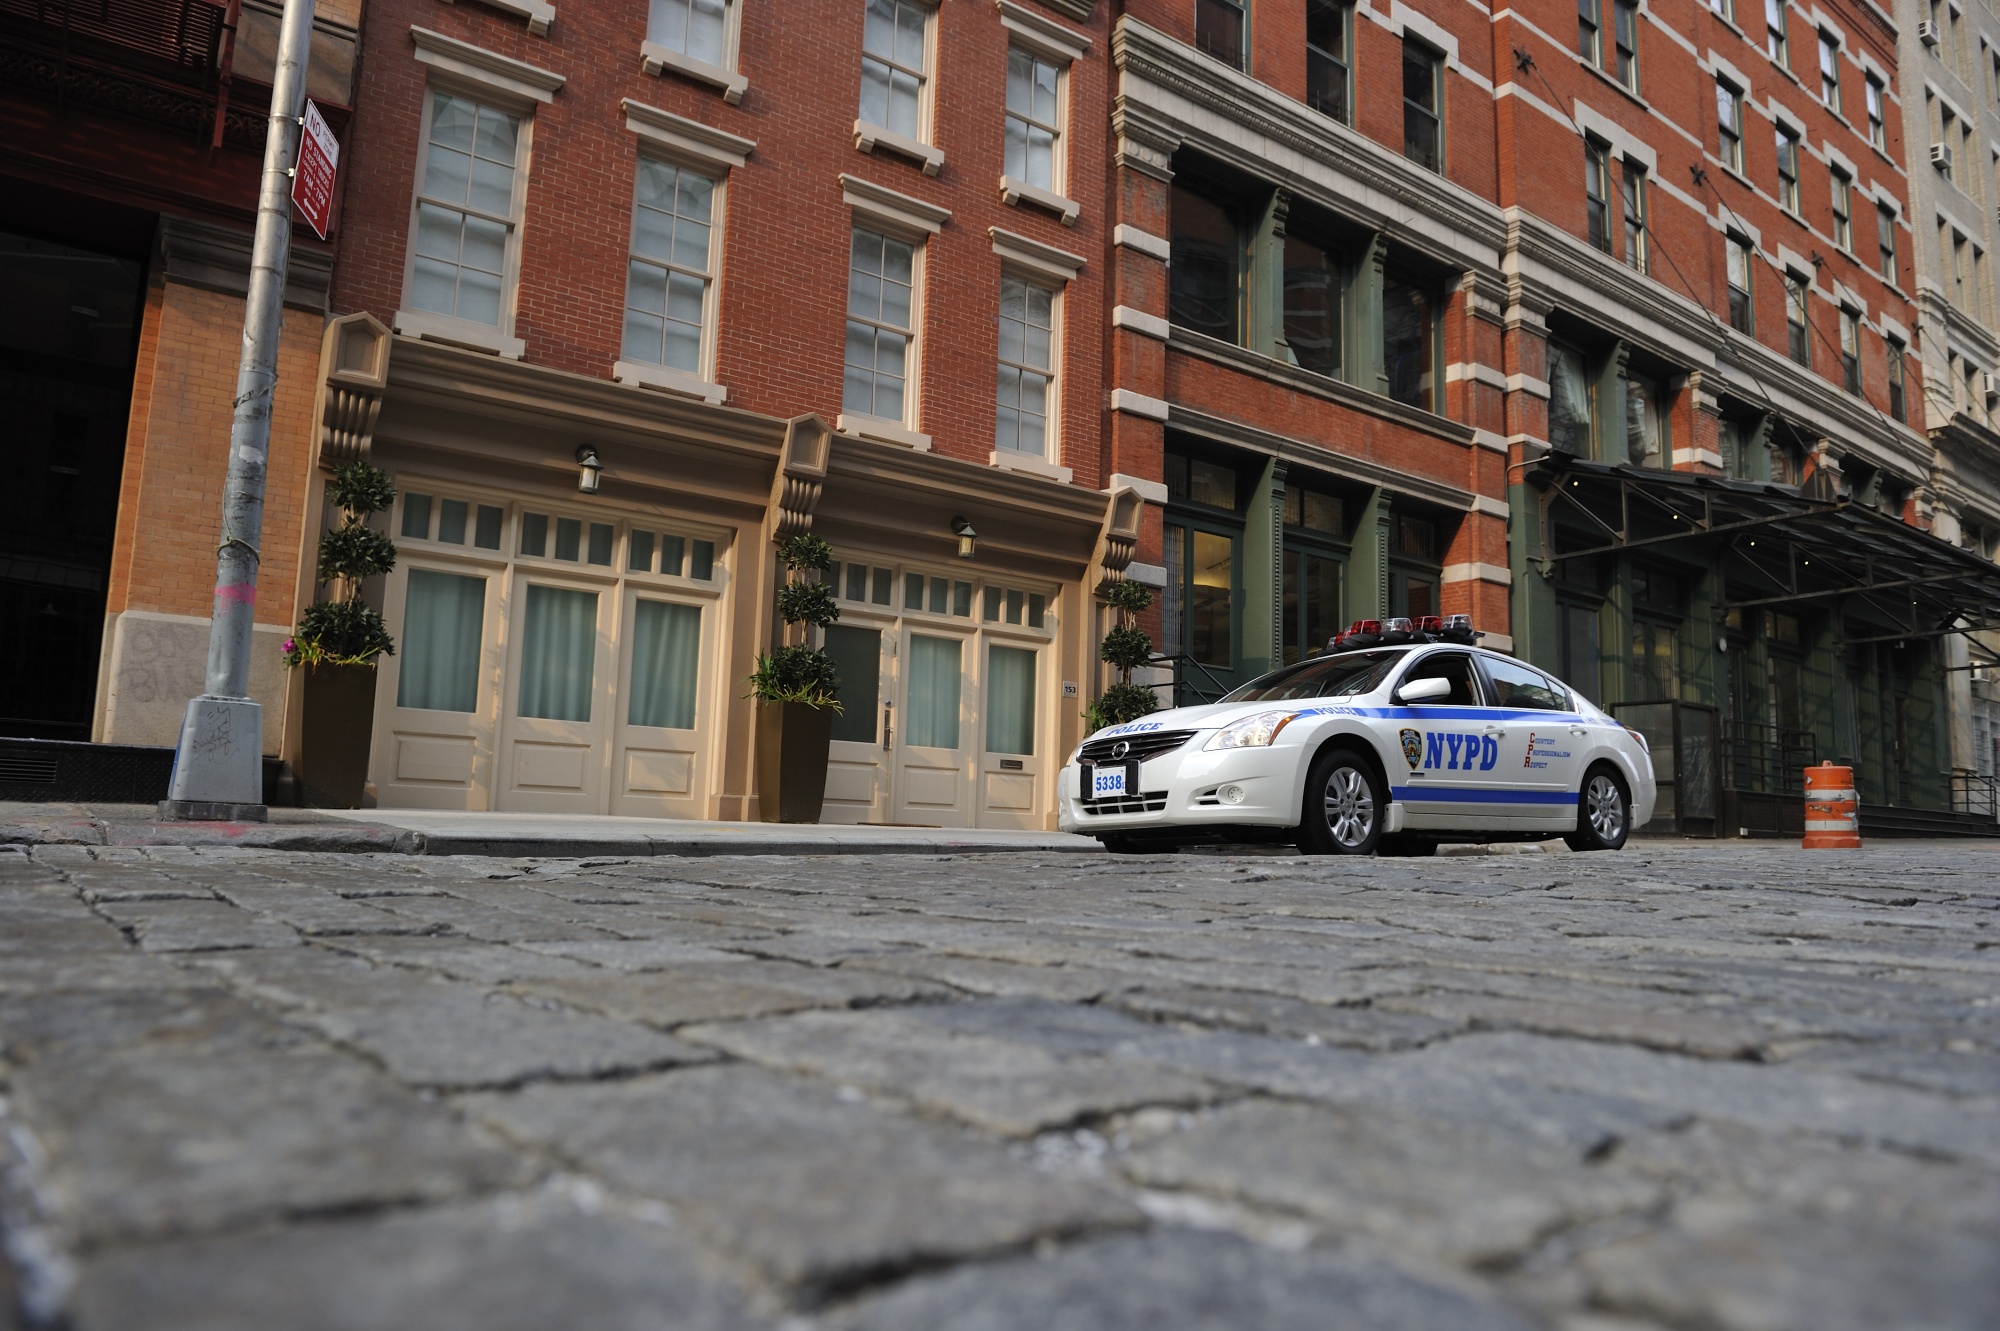 A New York Police Department car in front of a store in&nbsp;New York.